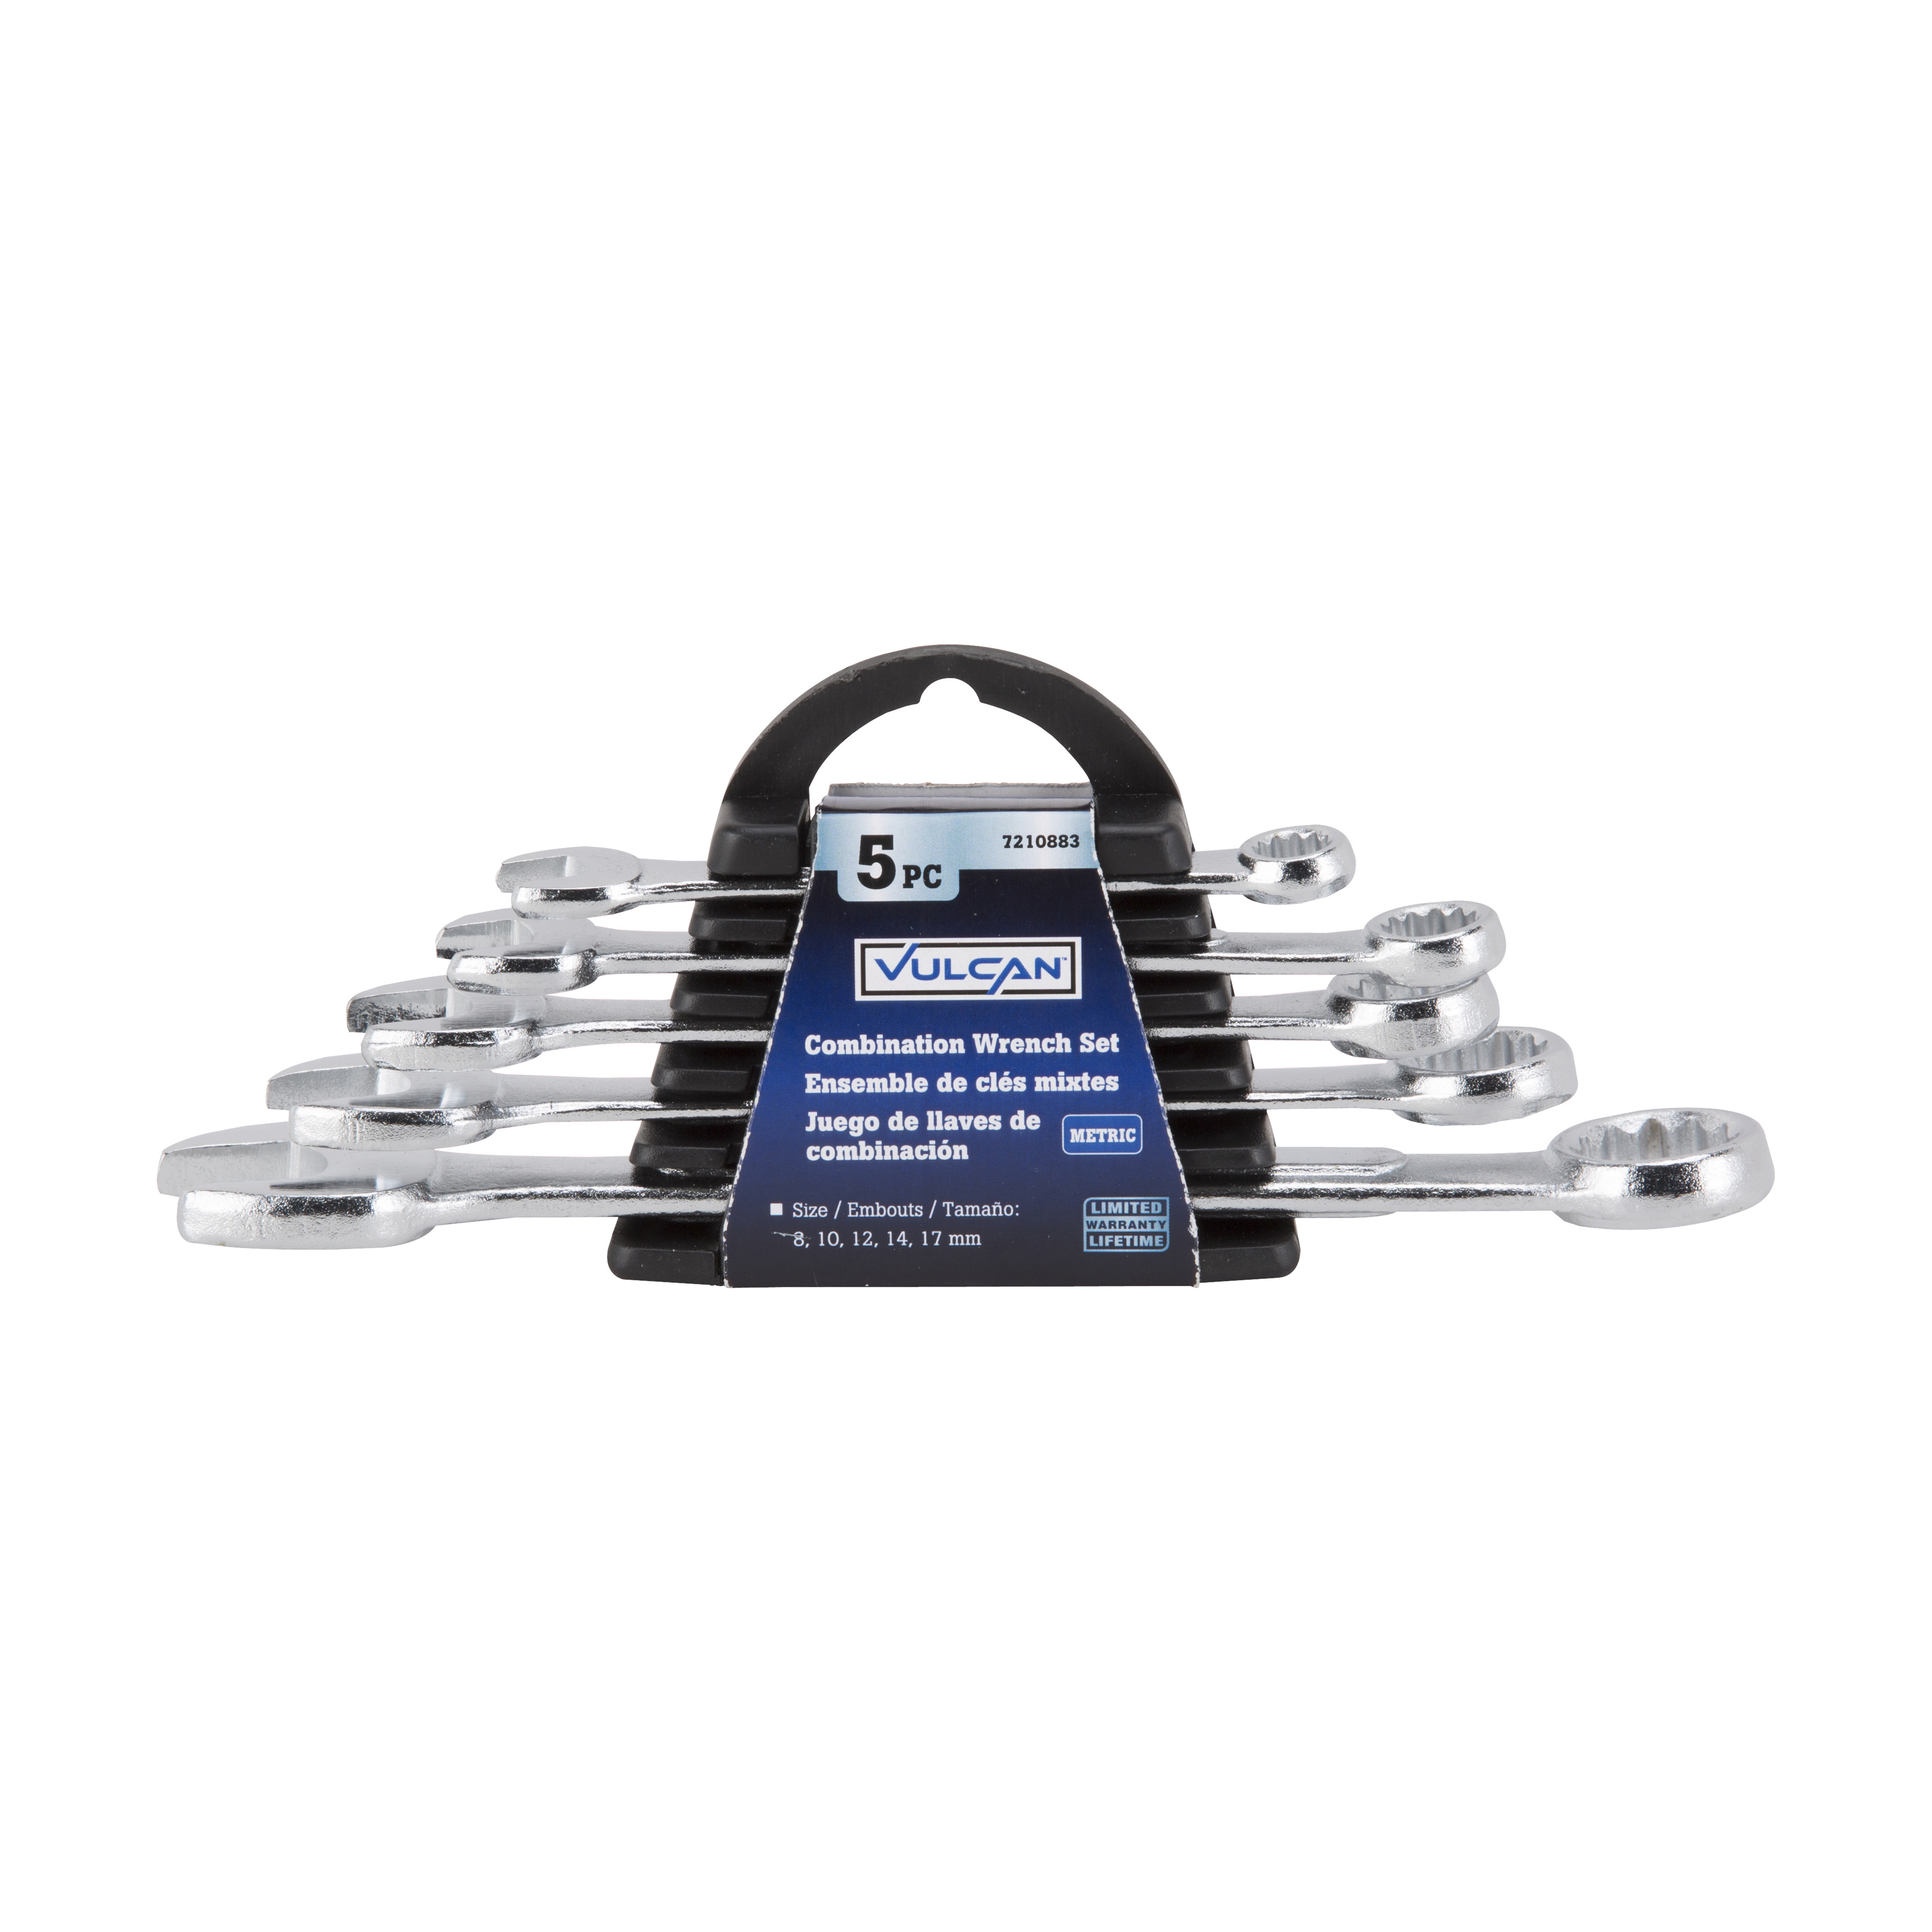 JL16062 Combination Wrench Set, 5-Piece, Steel, Chrome, Silver